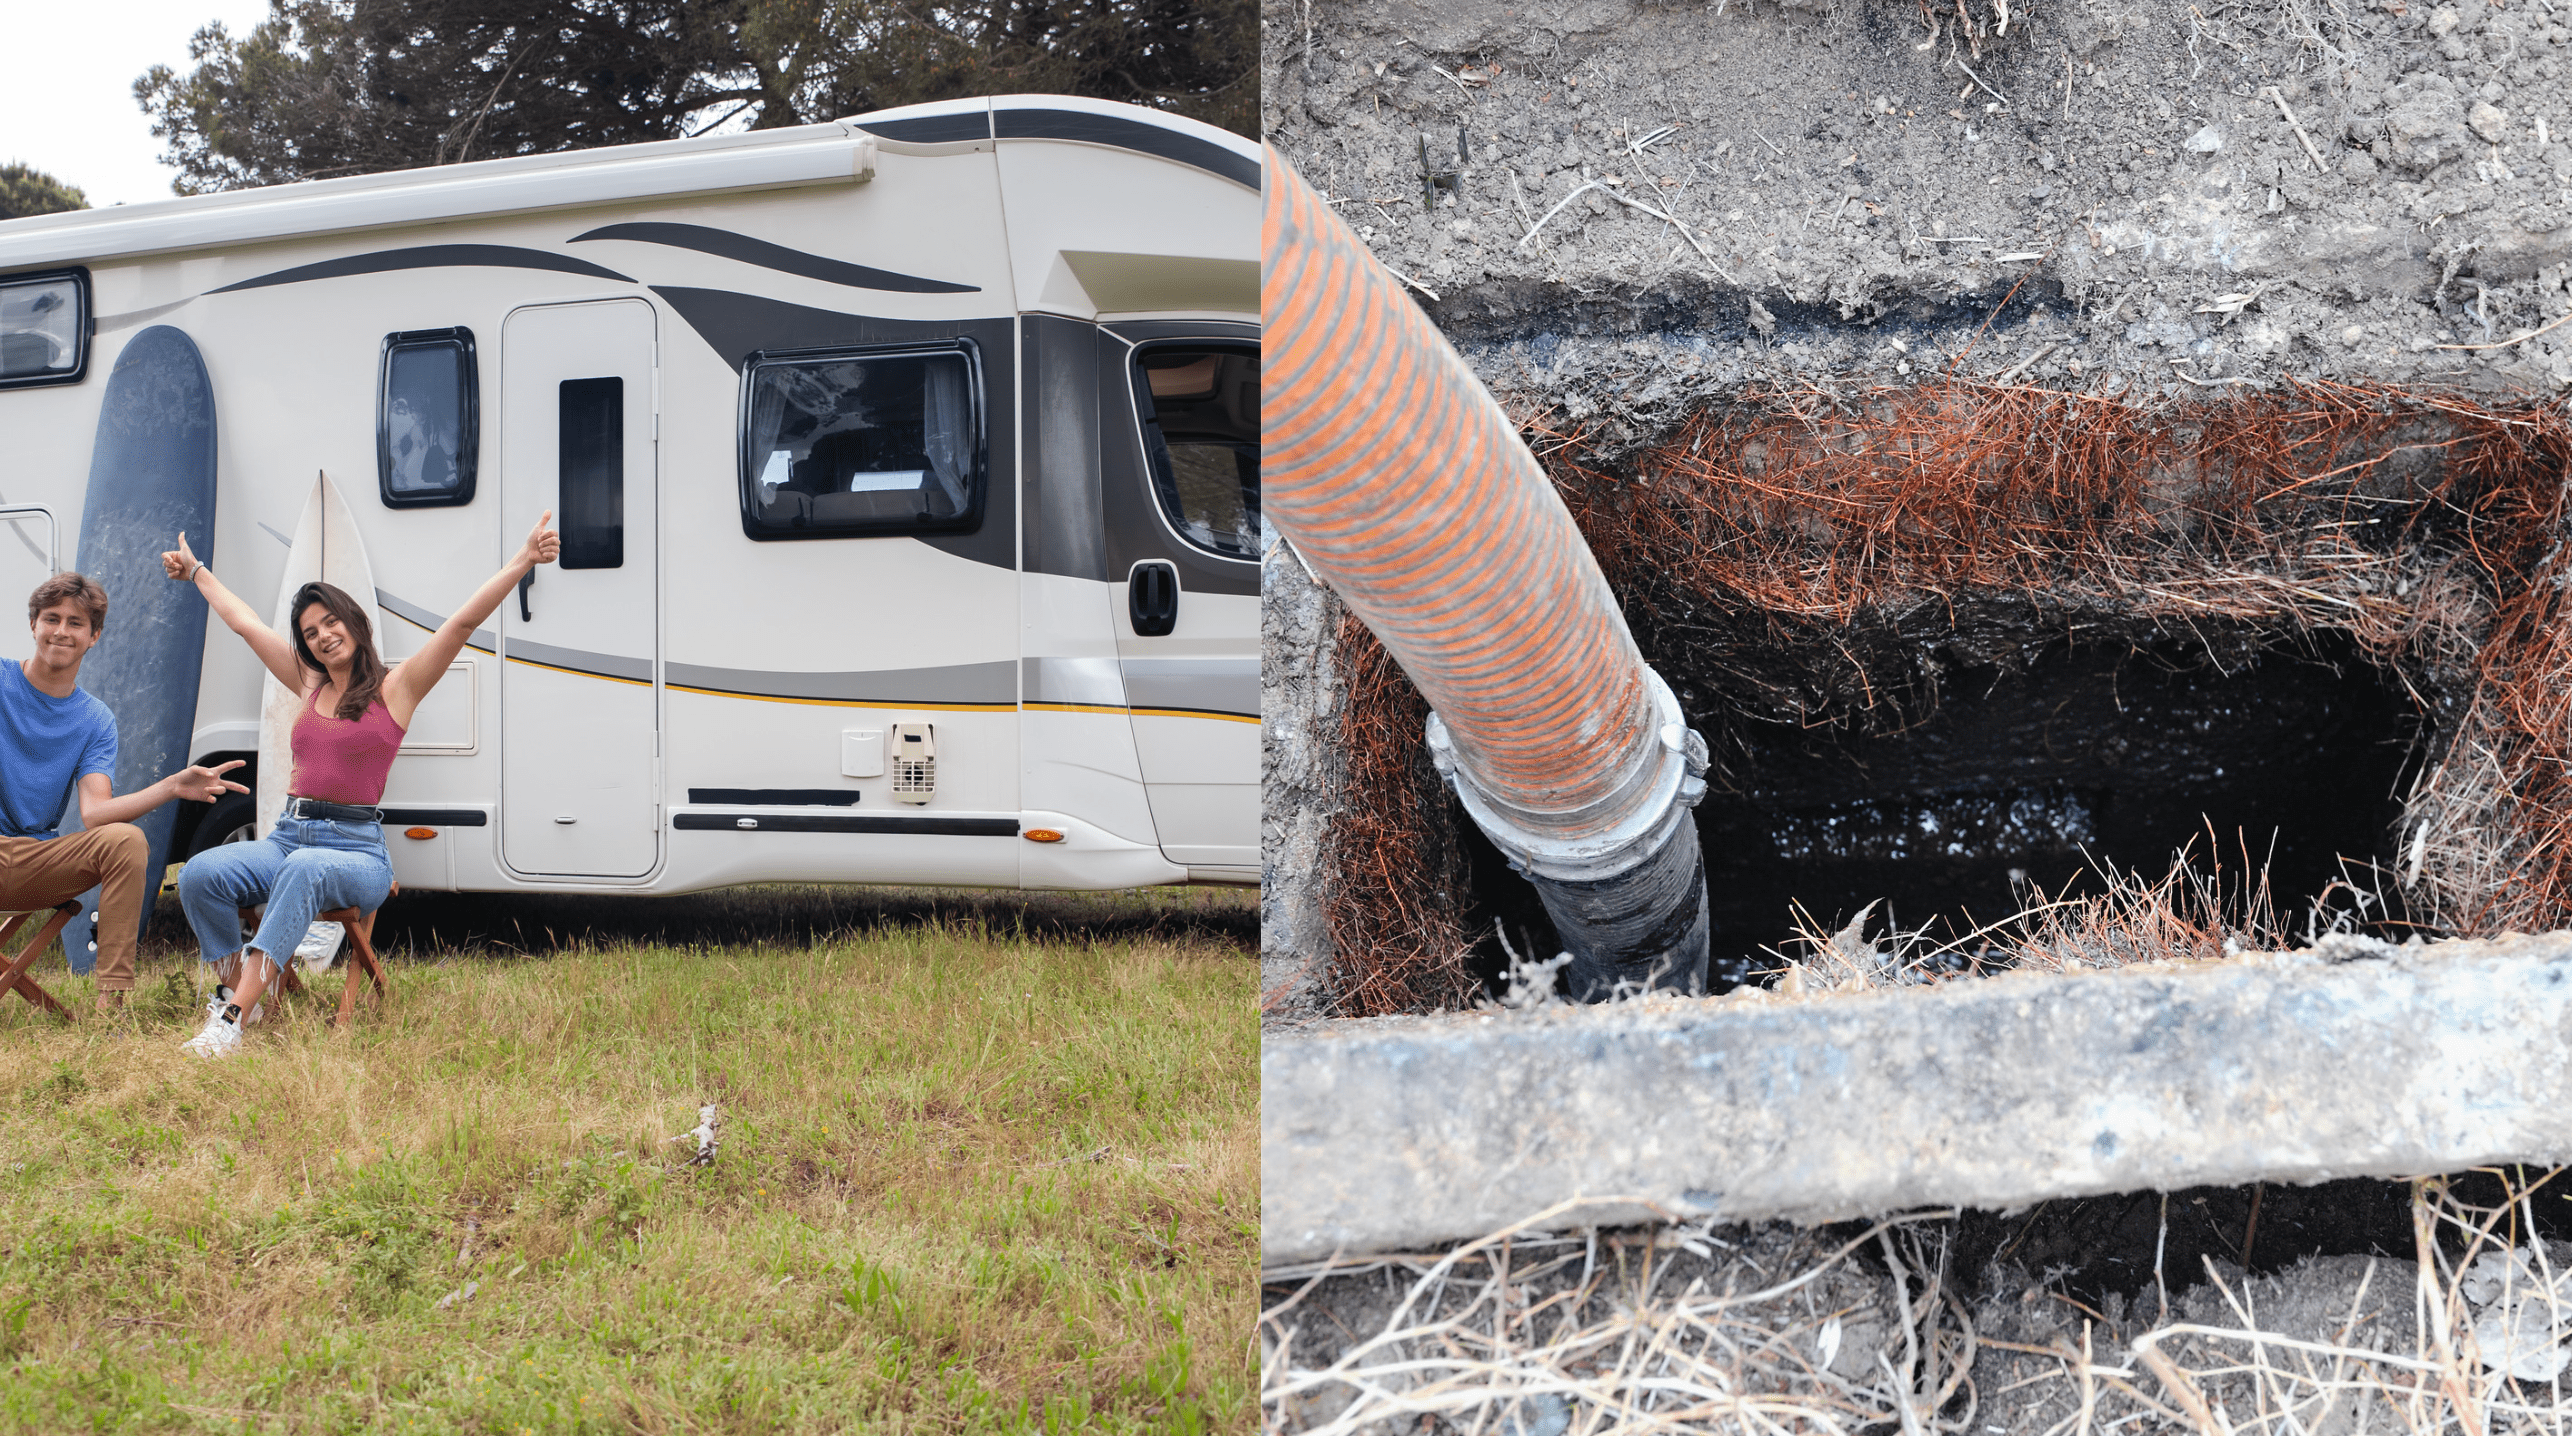 Can You Hook Up Your Rv to a Septic Tank?